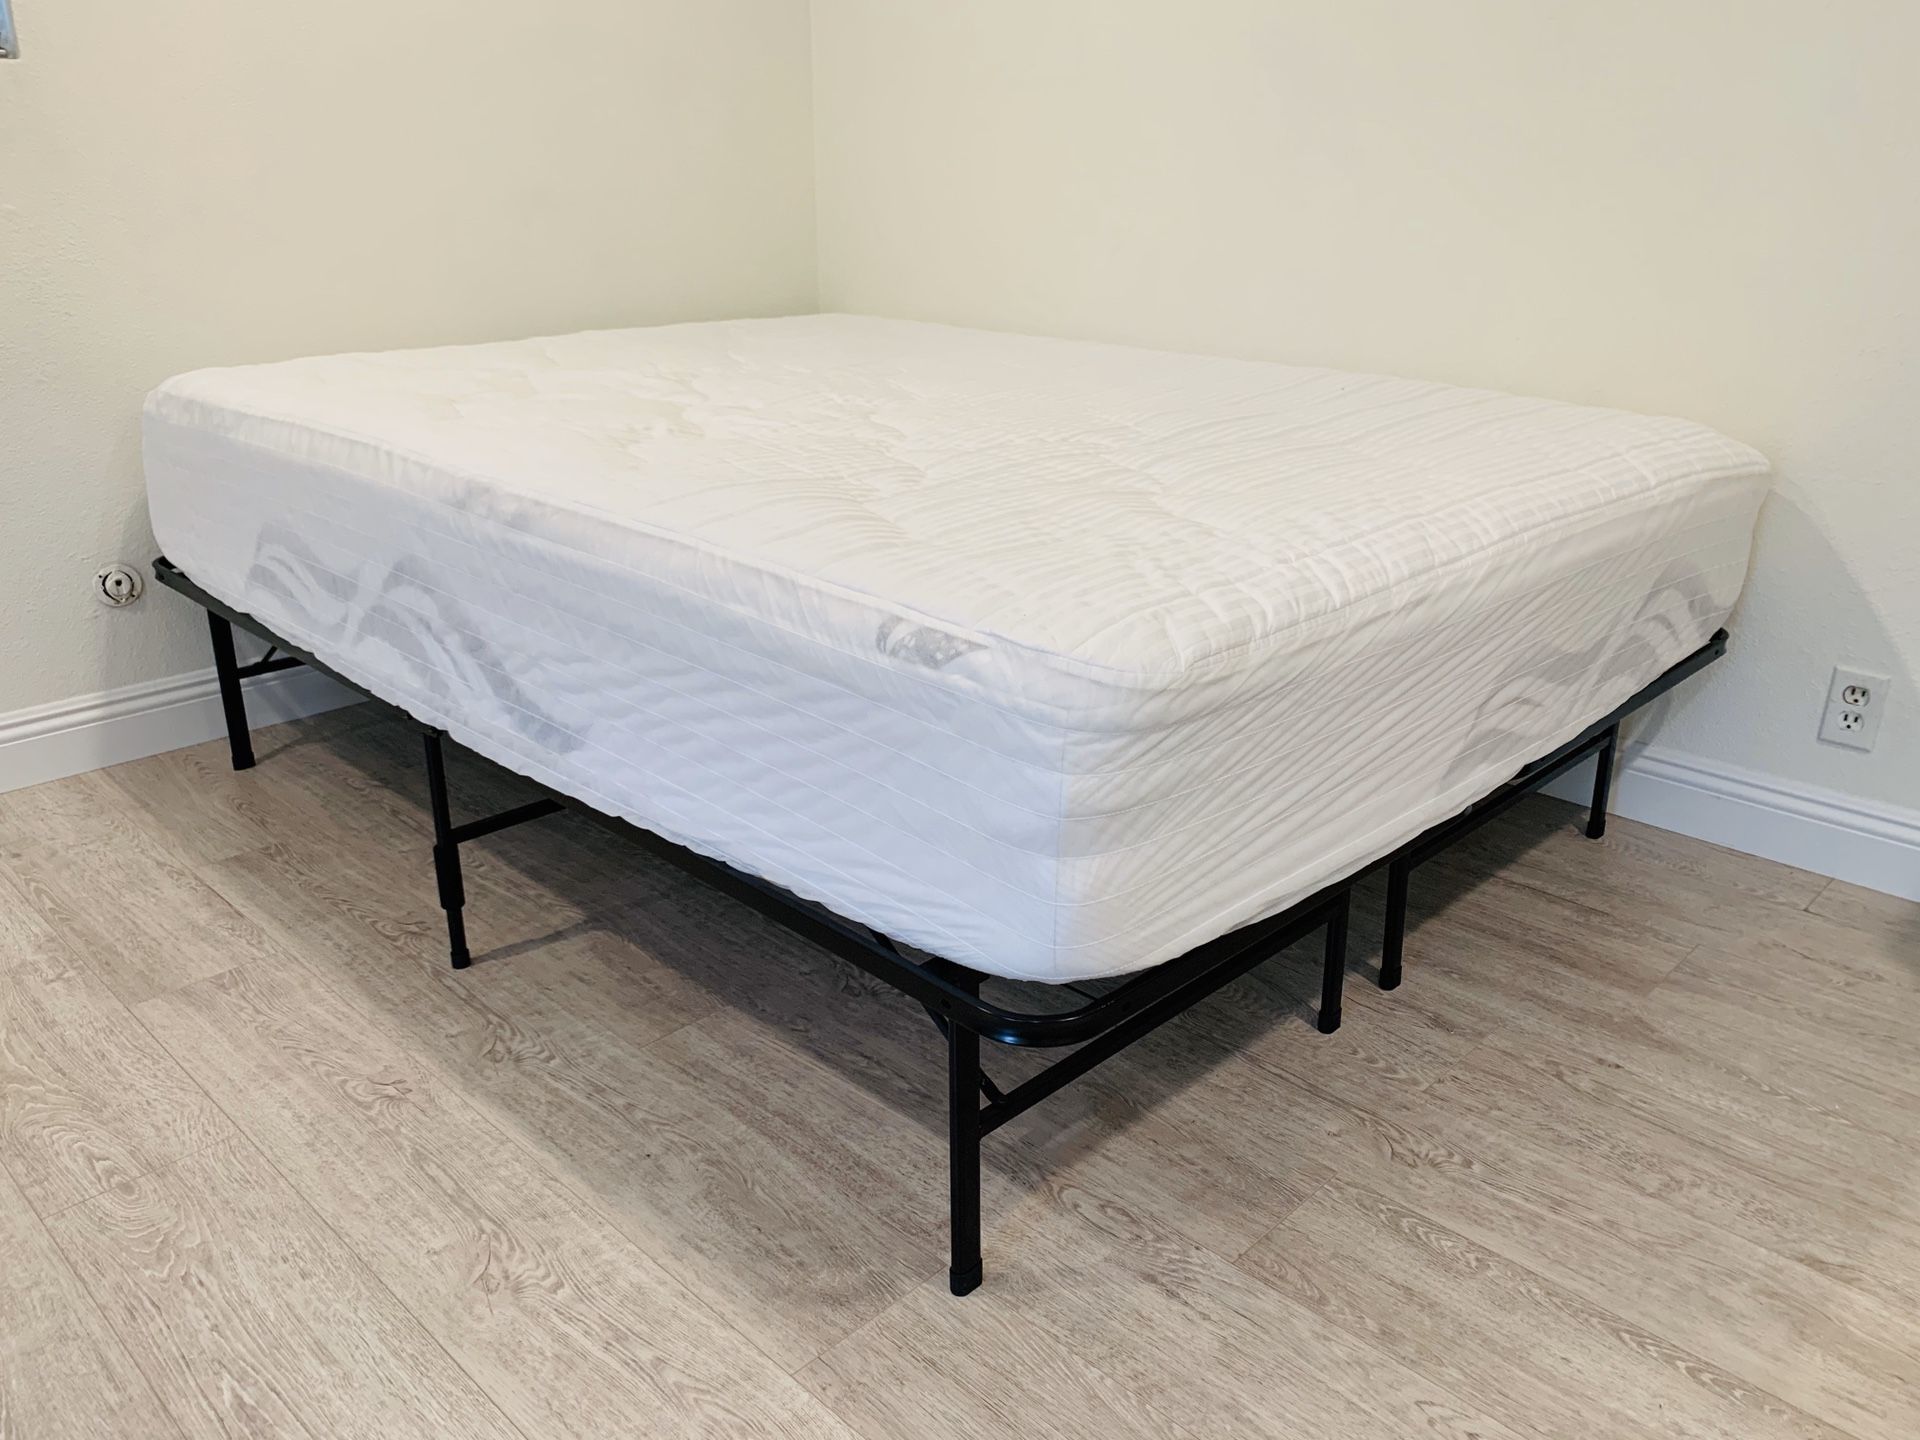 Queen Size Bed Mattress with Two foldable frames